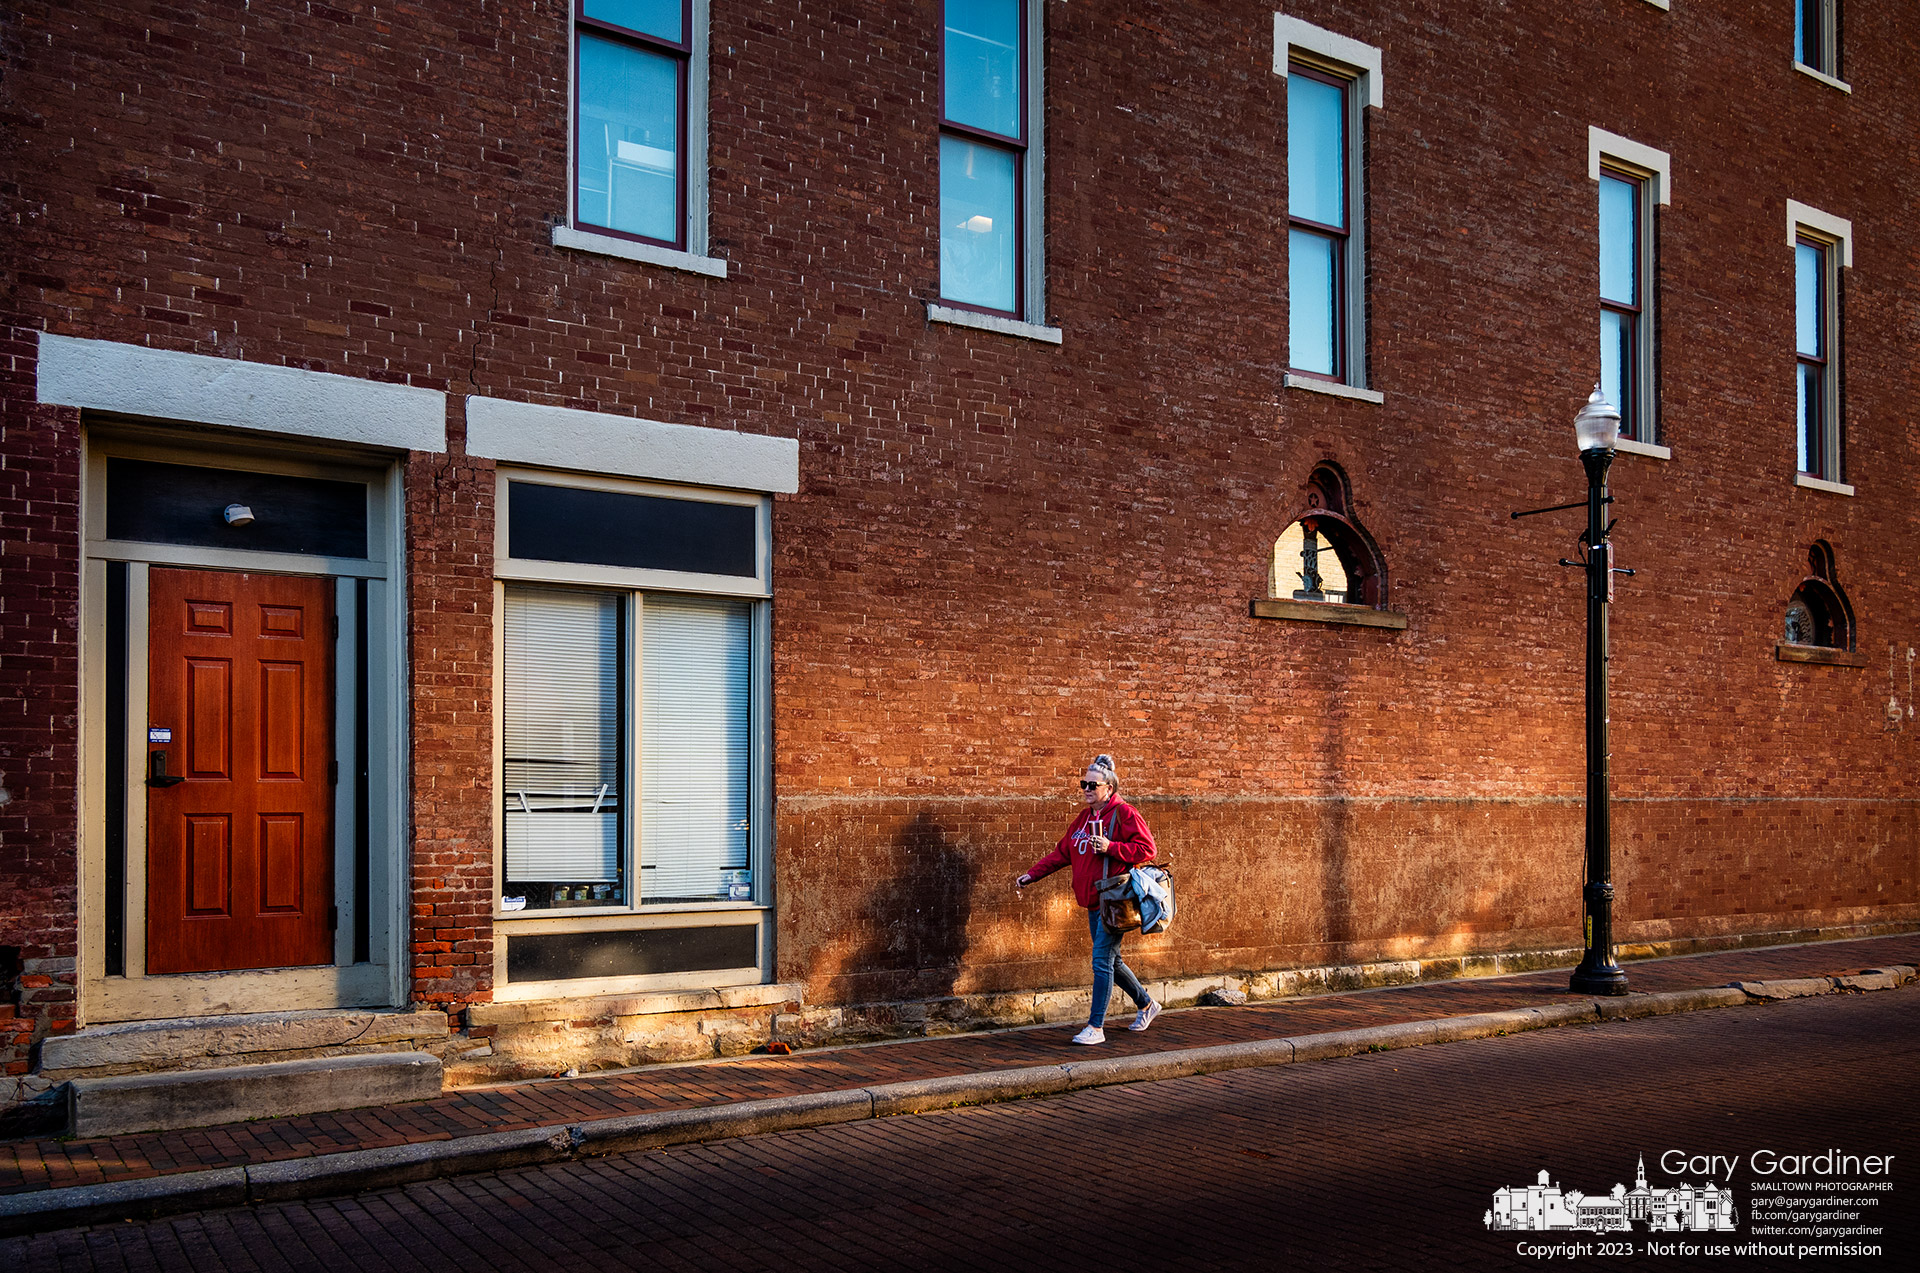 Leah Paugh walks along the wall of Old Bag of Nails where the setting sun reflected from the building across the street lights her way home. My Final Photo for November 18, 2023.